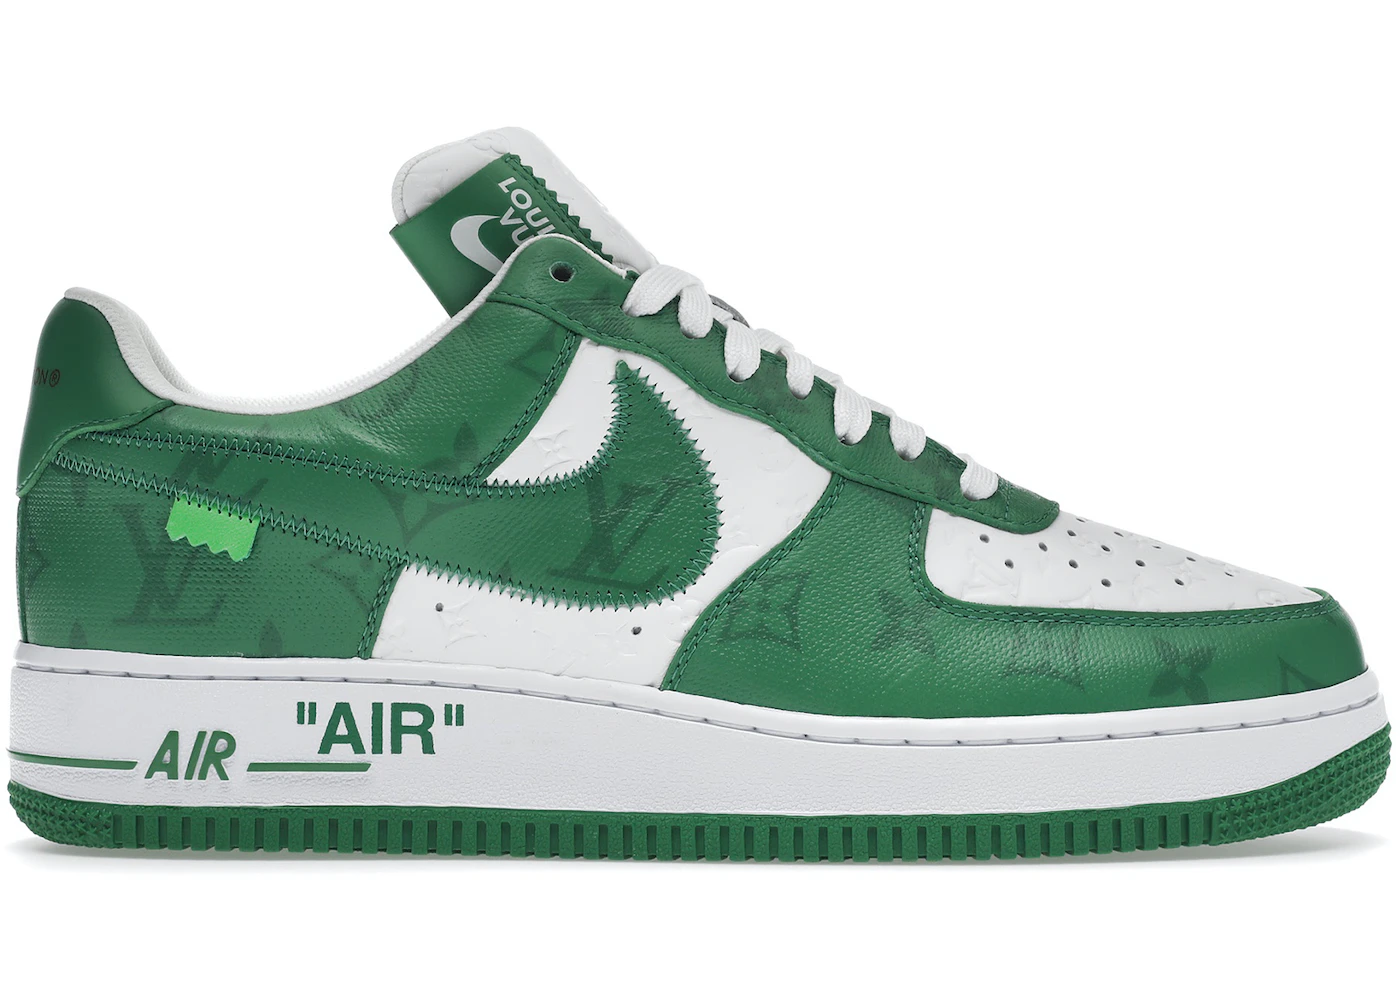 Naufragio Claire Antagonismo Louis Vuitton Nike Air Force 1 Low By Virgil Abloh White Green Men's - - US